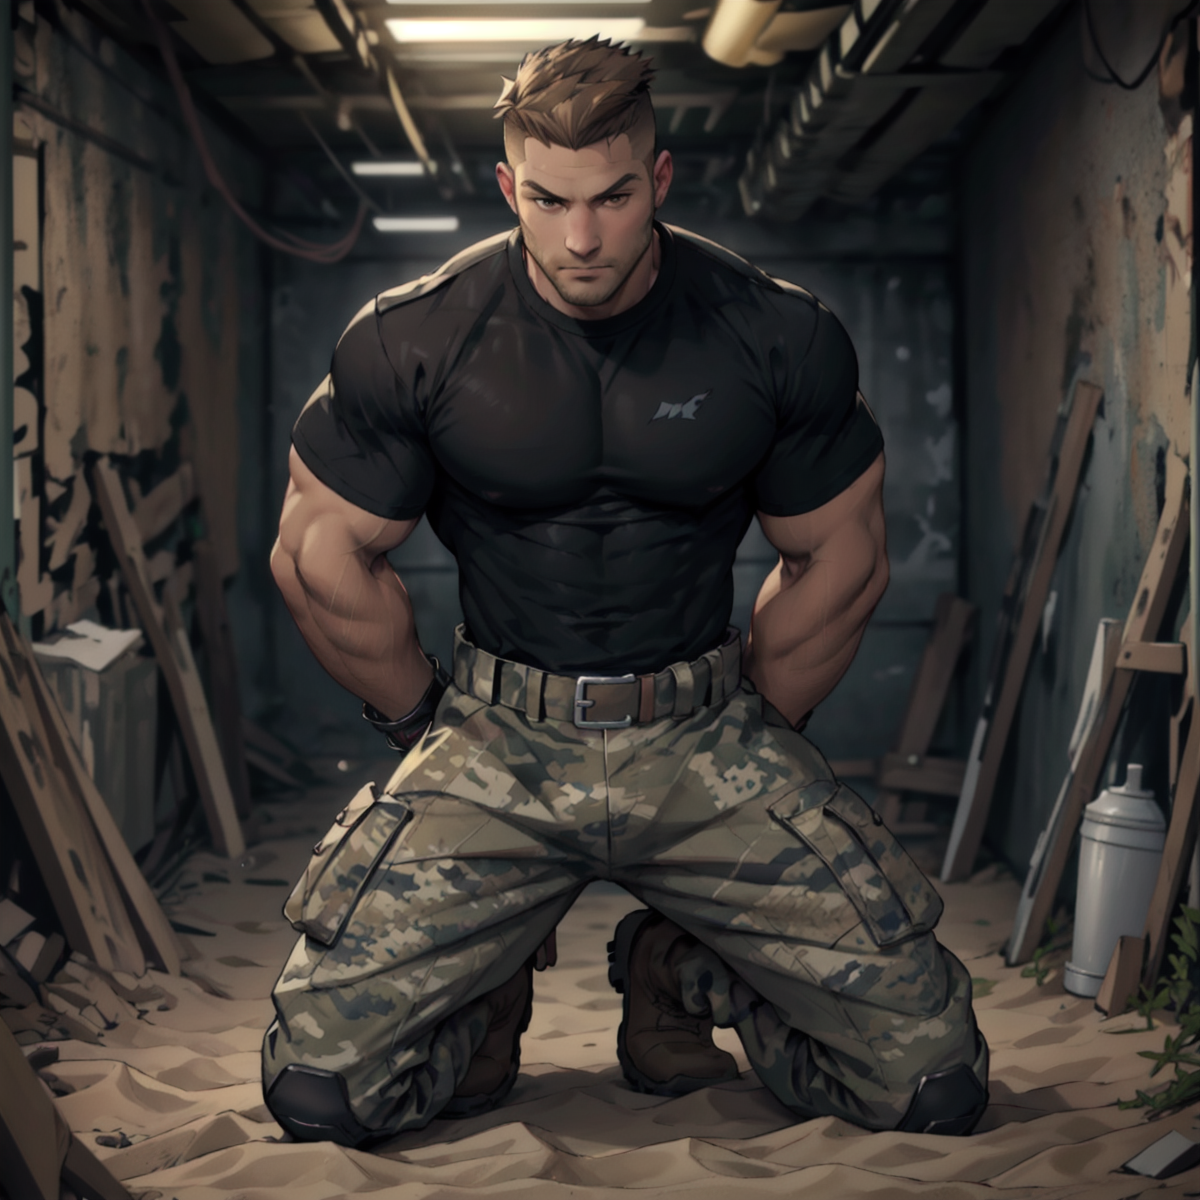 A muscular man in military fatigues is sitting on the ground.